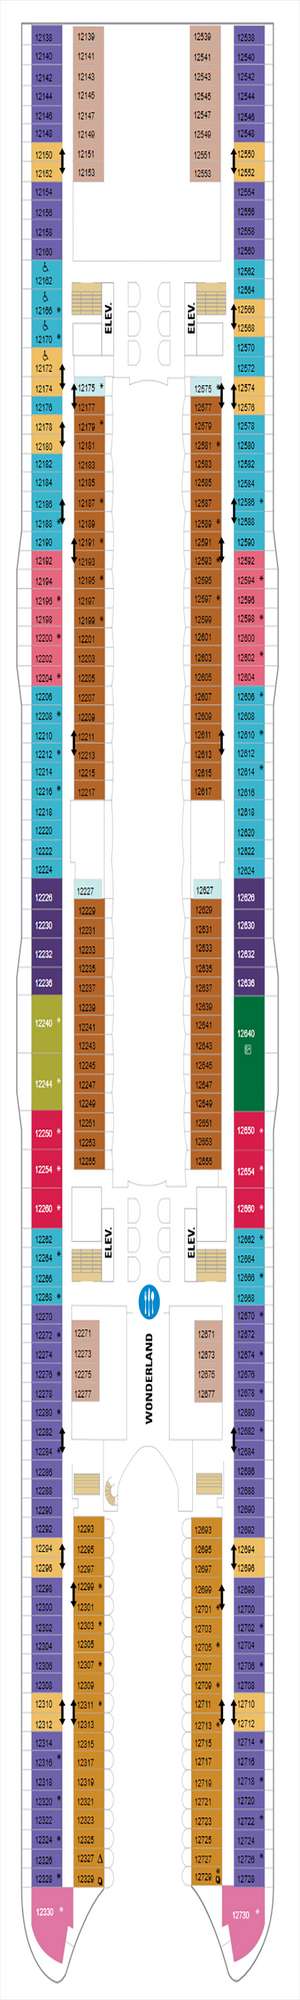 Deck plan for Harmony of the Seas